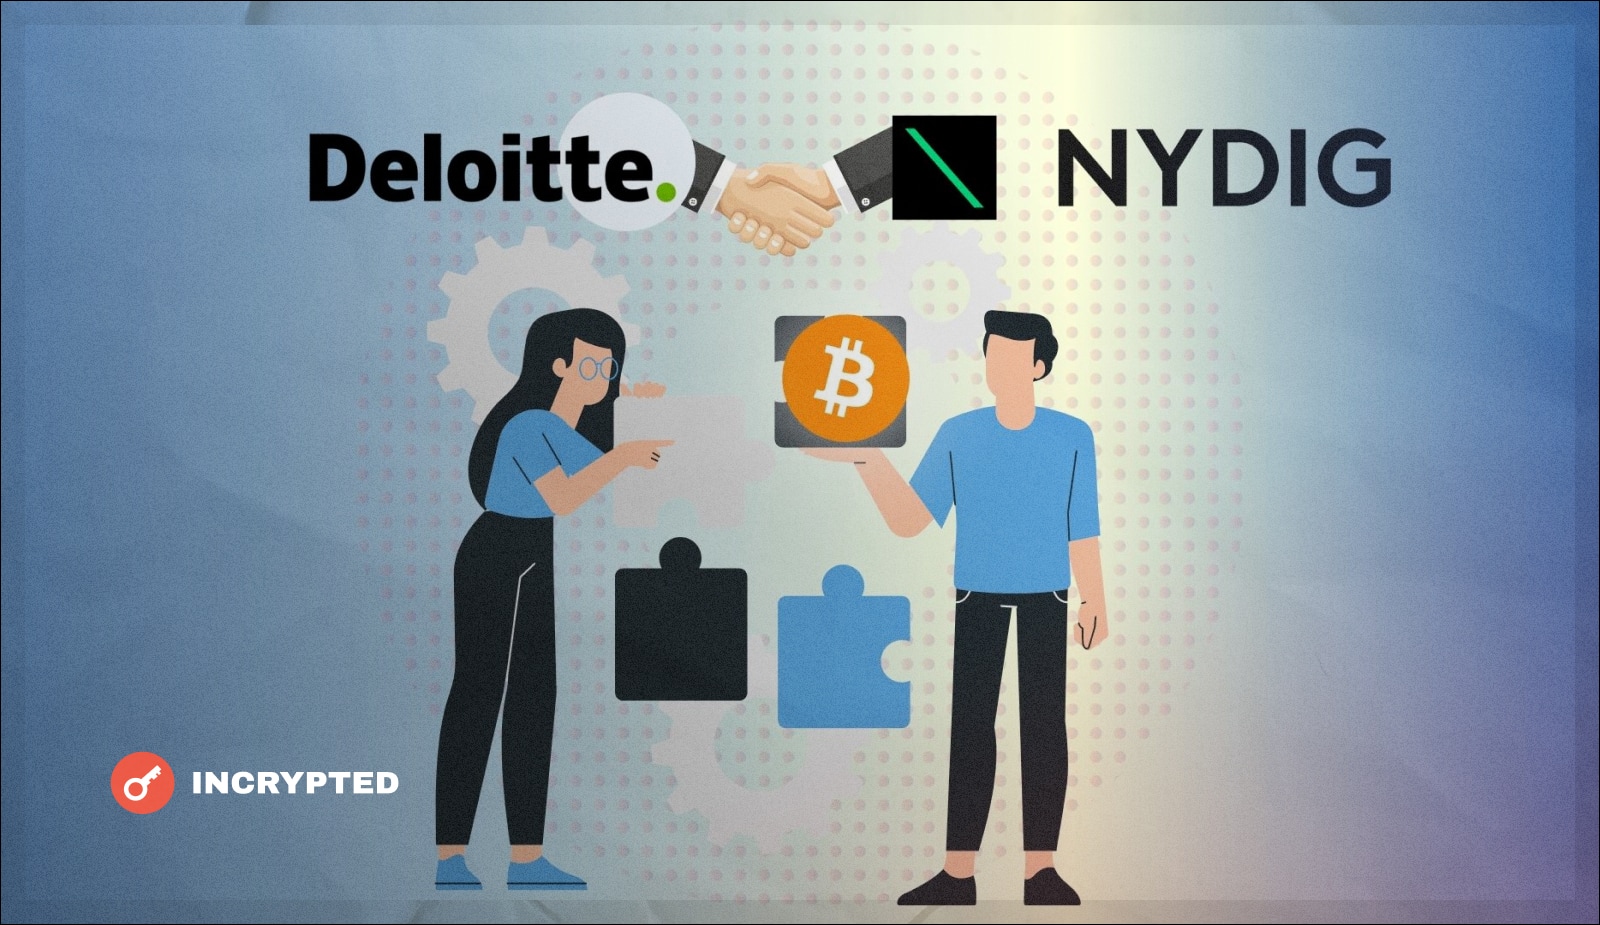 Deloitte and NYDIG have entered into a strategic alliance The companies intend to work together to promote digital assets in the global market